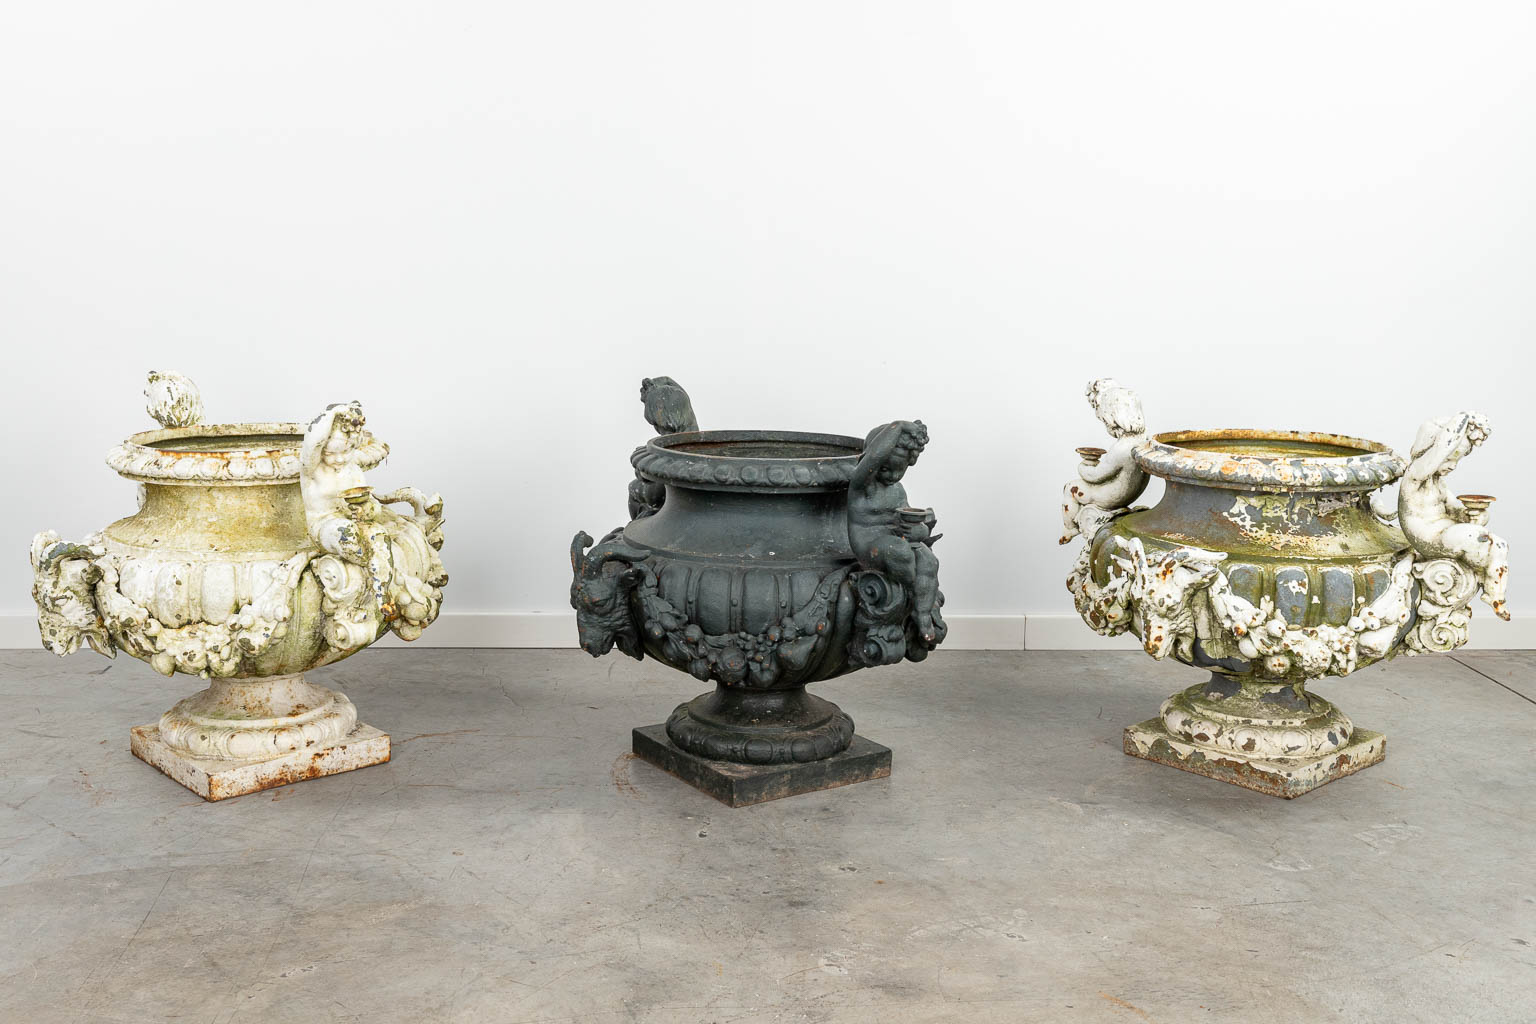 A set of 3 large garden vases made of cast iron, decorated with putti and ram's heads. (H:57cm) - Image 10 of 16